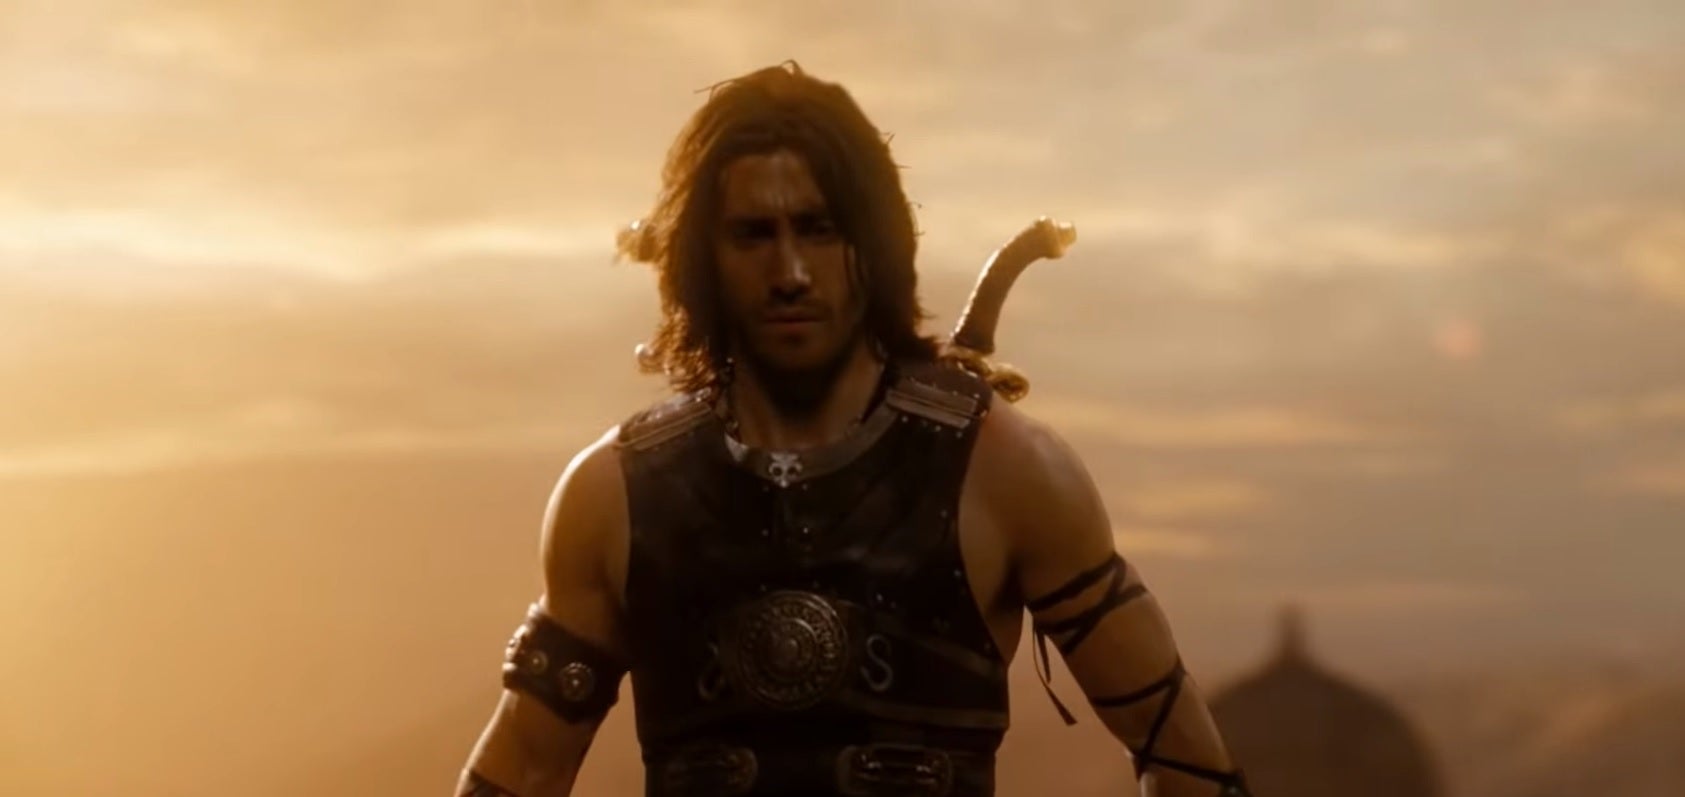 Image for Jake Gyllenhaal says accepting his role in whitewashed Prince of Persia movie was a mistake